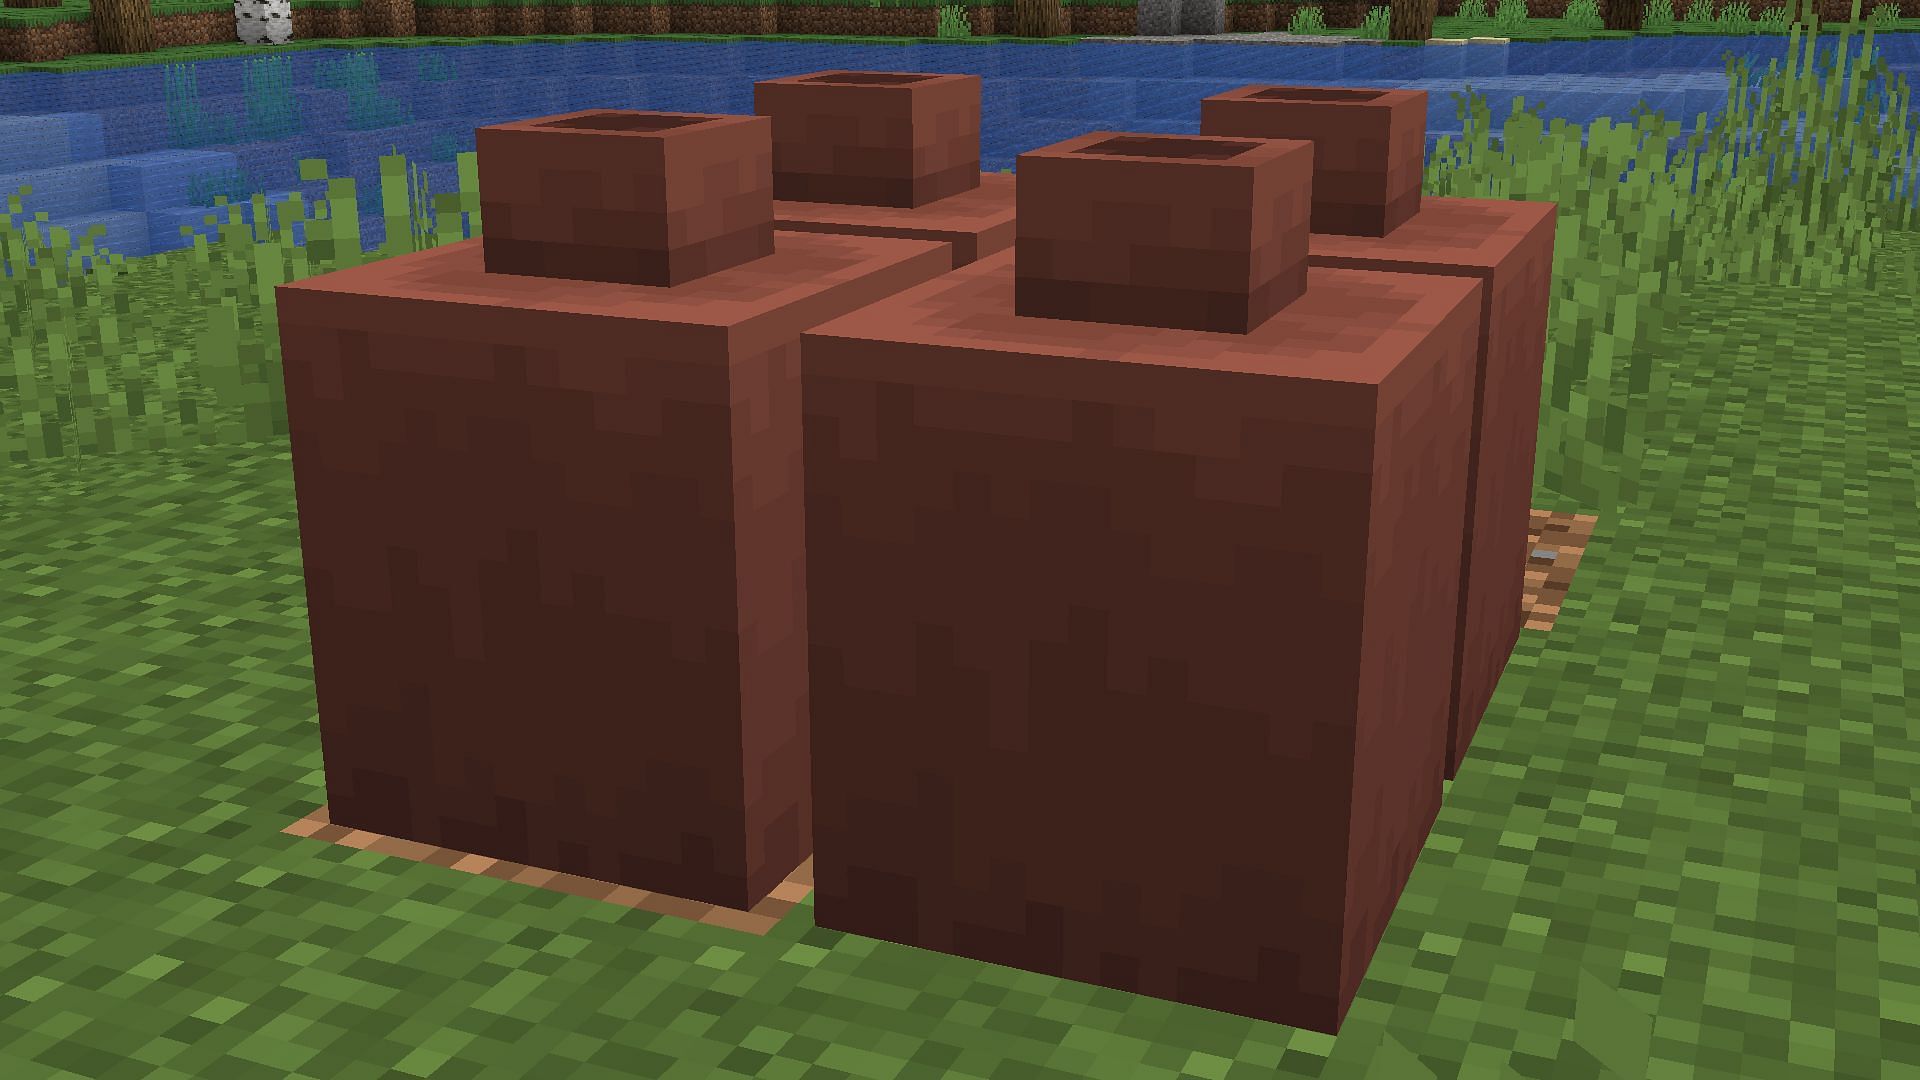 Decorated pots are new decoration blocks in Minecraft 1.20 update (Image via Mojang)